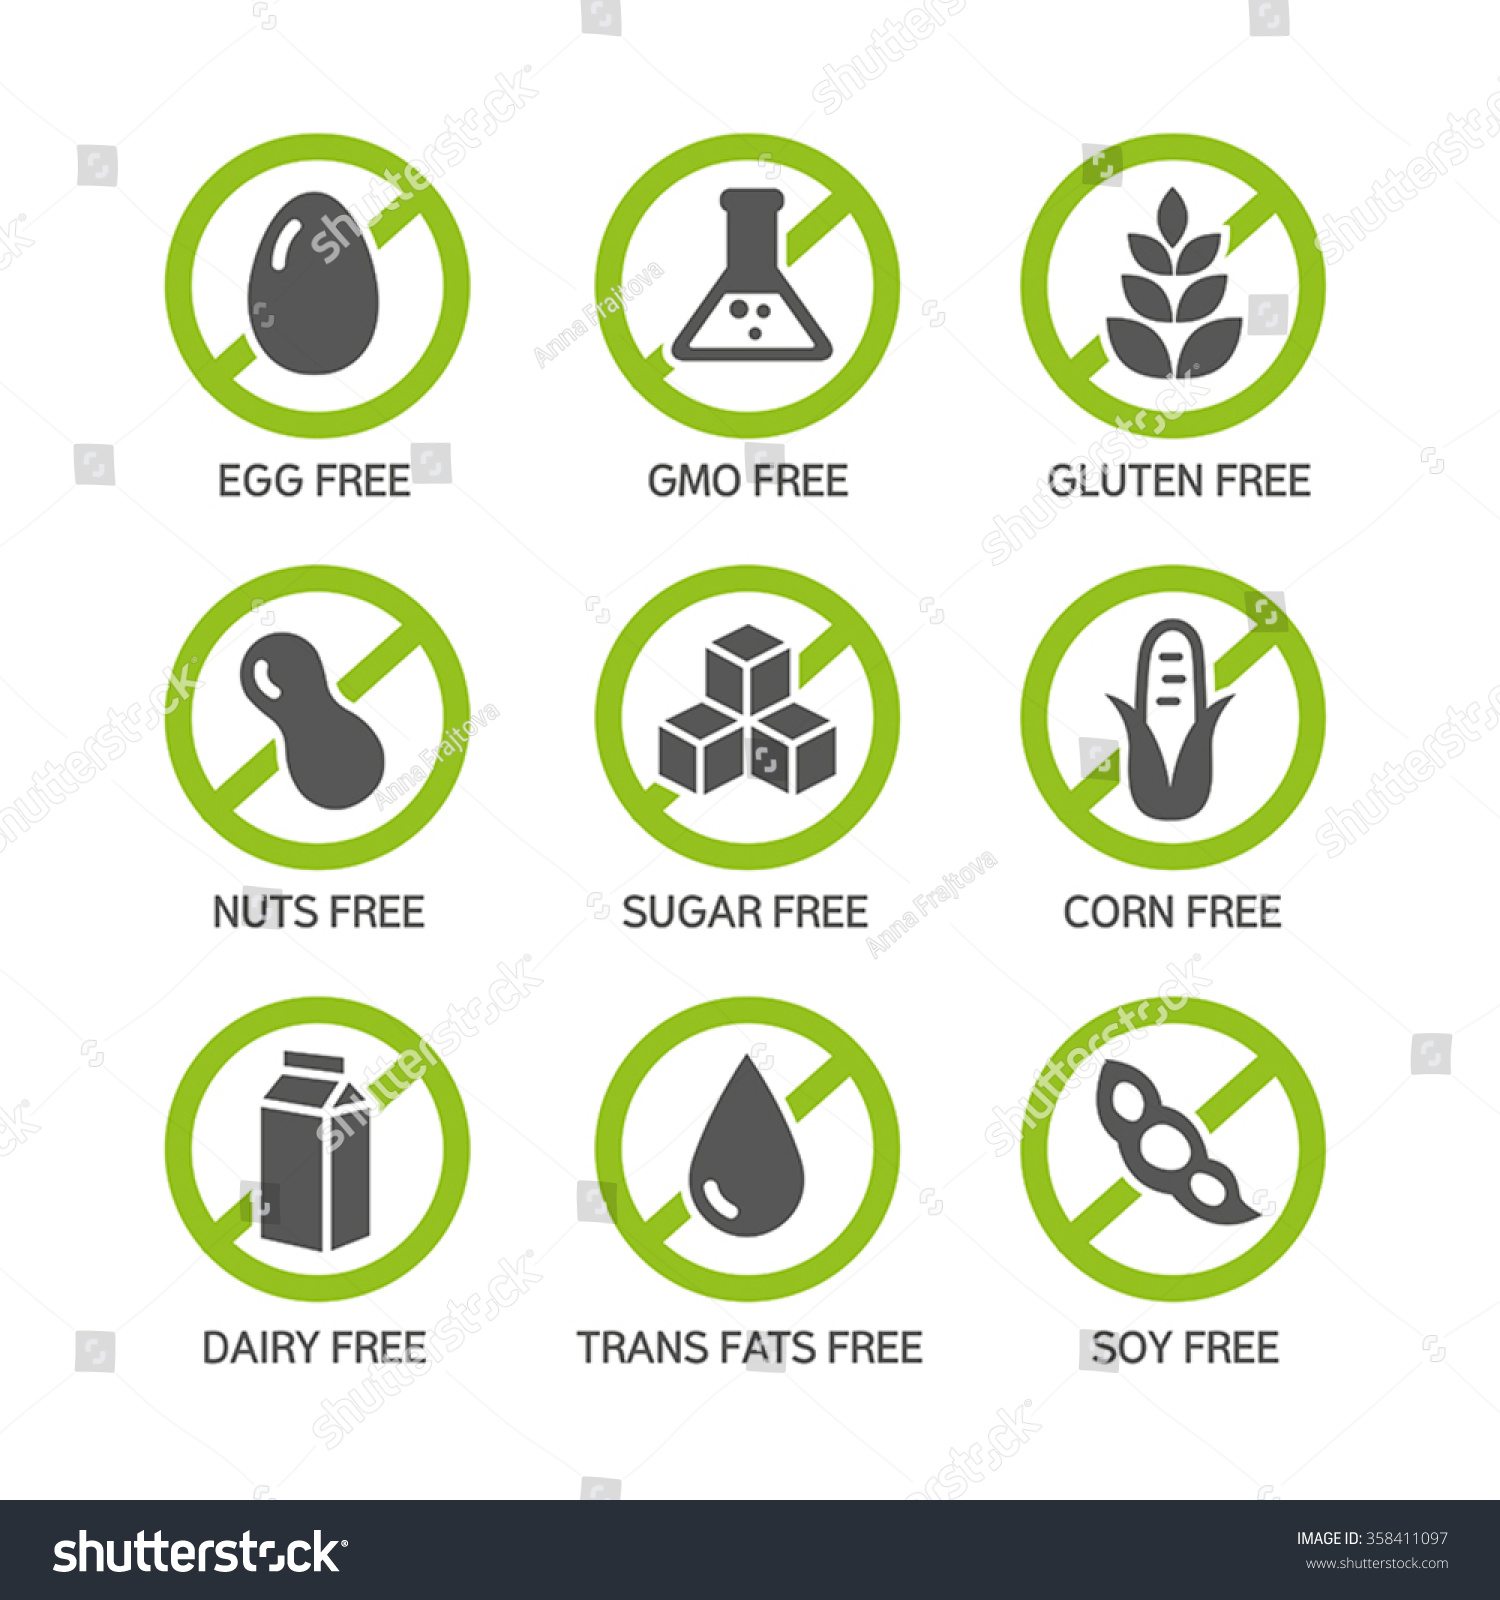 SVG of Set of food labels - allergens, GMO free products. svg